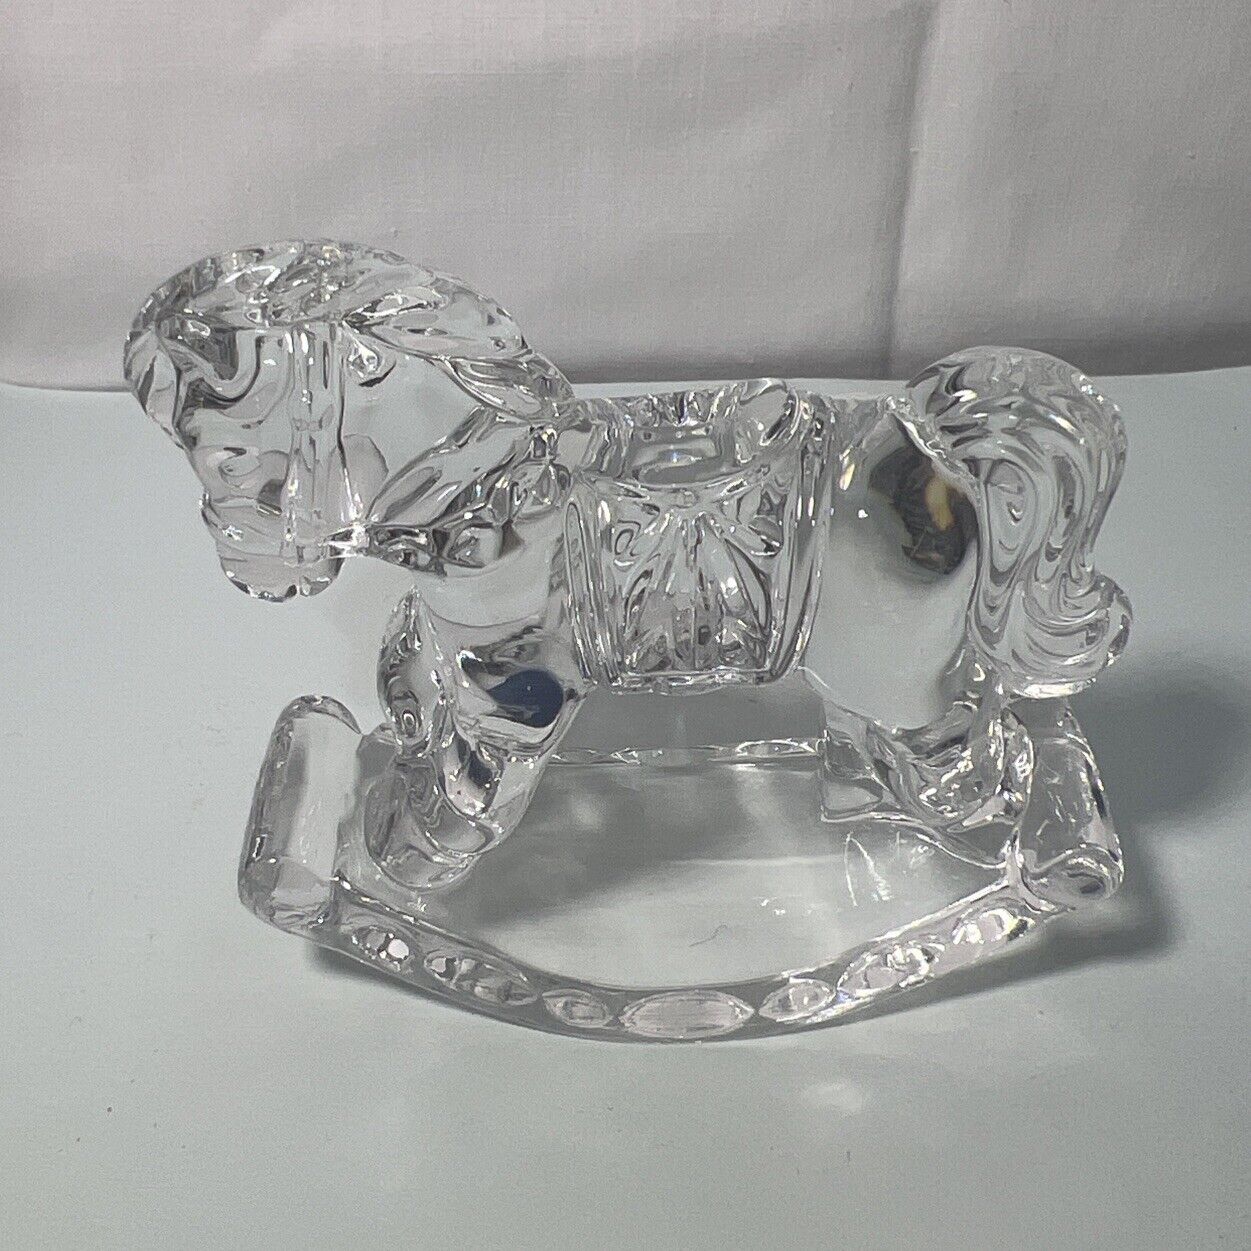 Vtg Princess House Lead Crystal Rocking Horse Figurine #840 Made in Germany